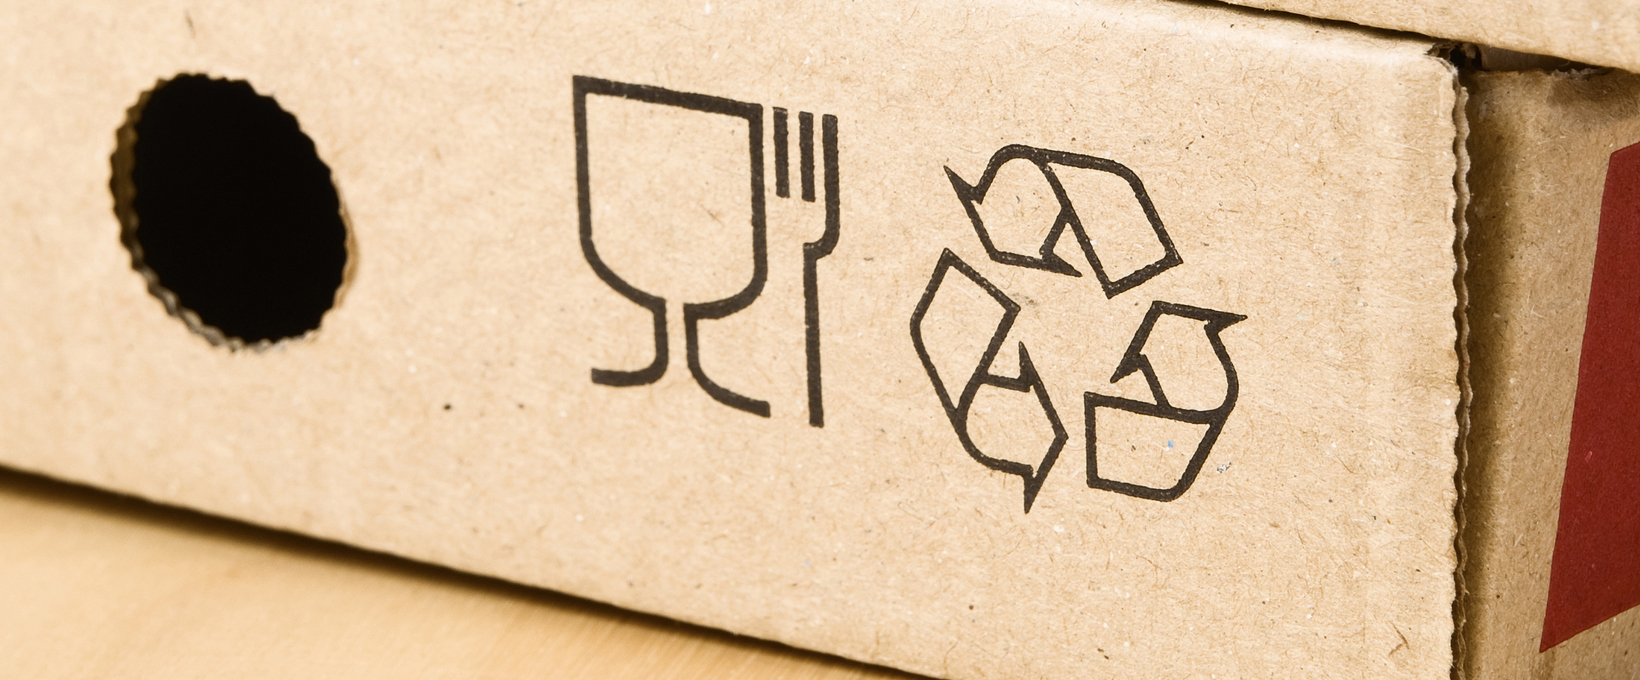 Packaging with recycle symbol in it